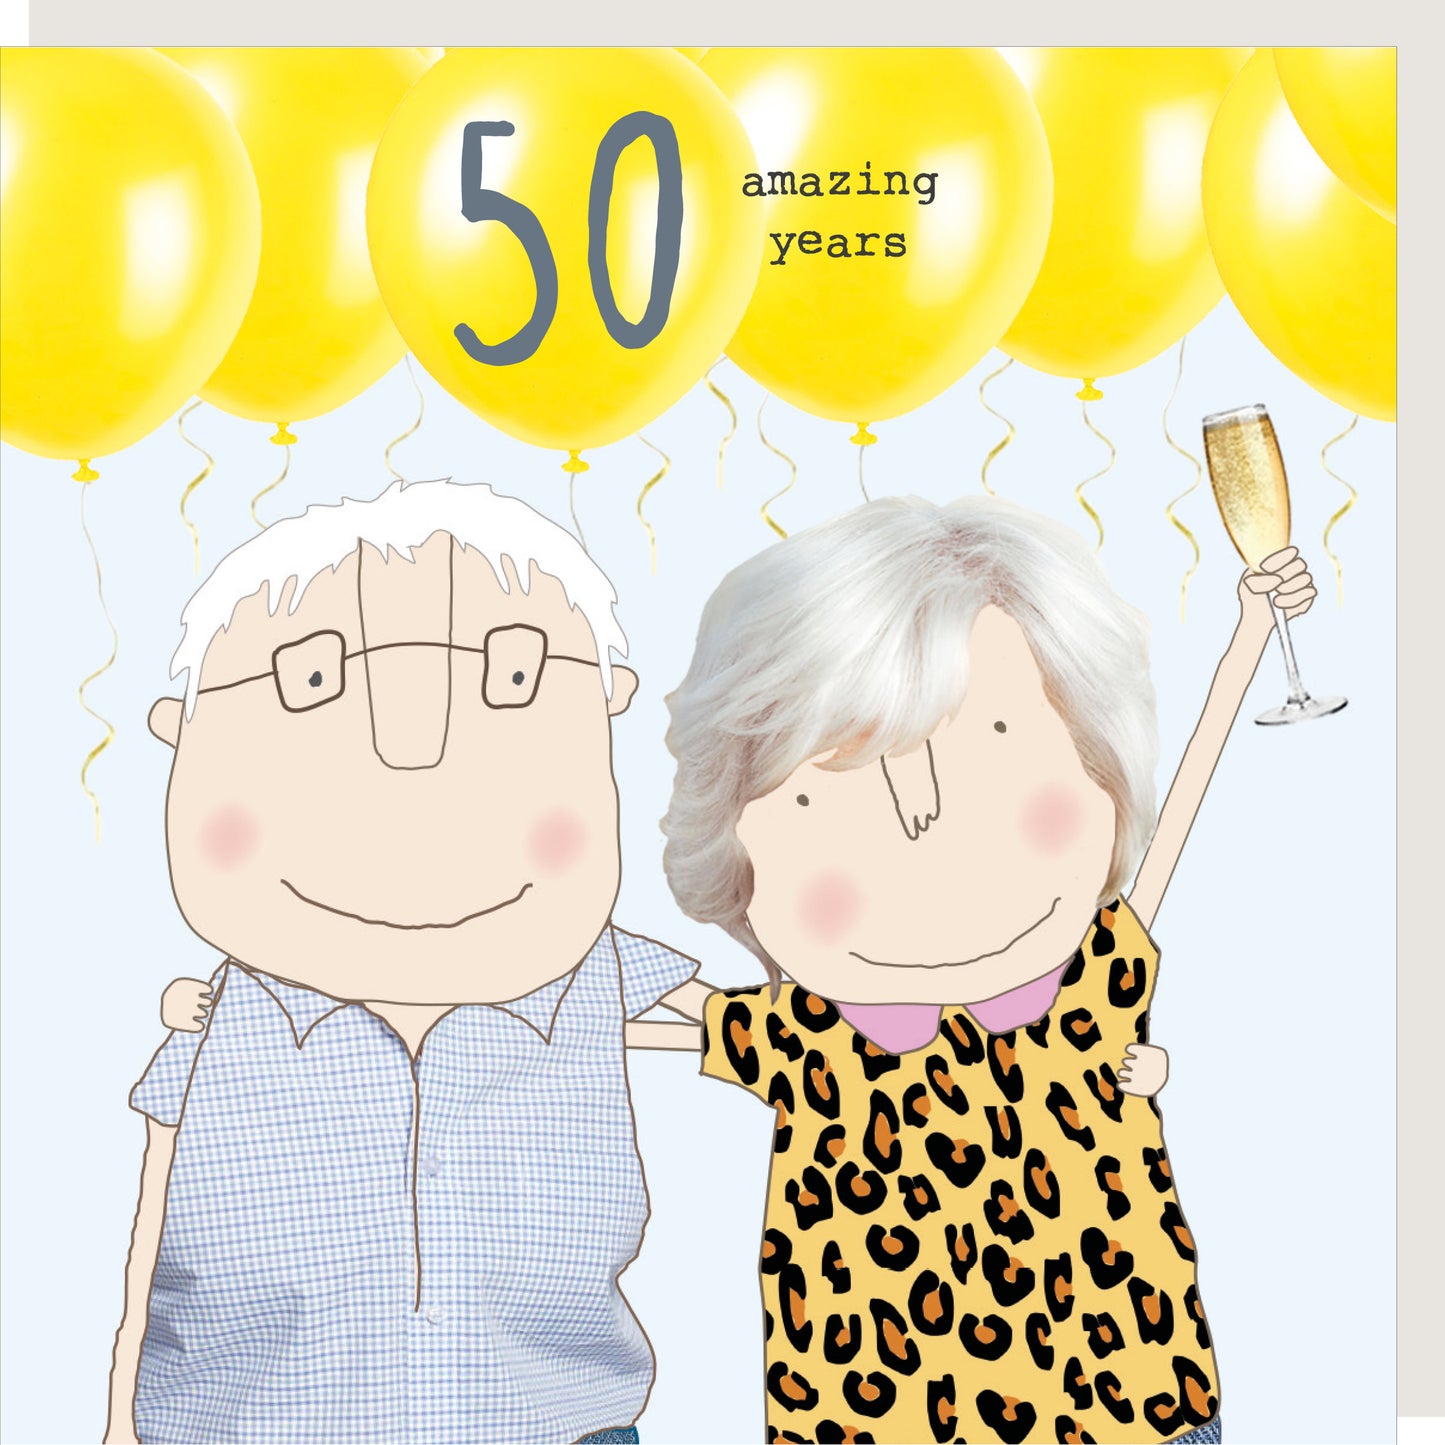 Rosie Made A Thing Amazing Years 50th Anniversary Greeting Card